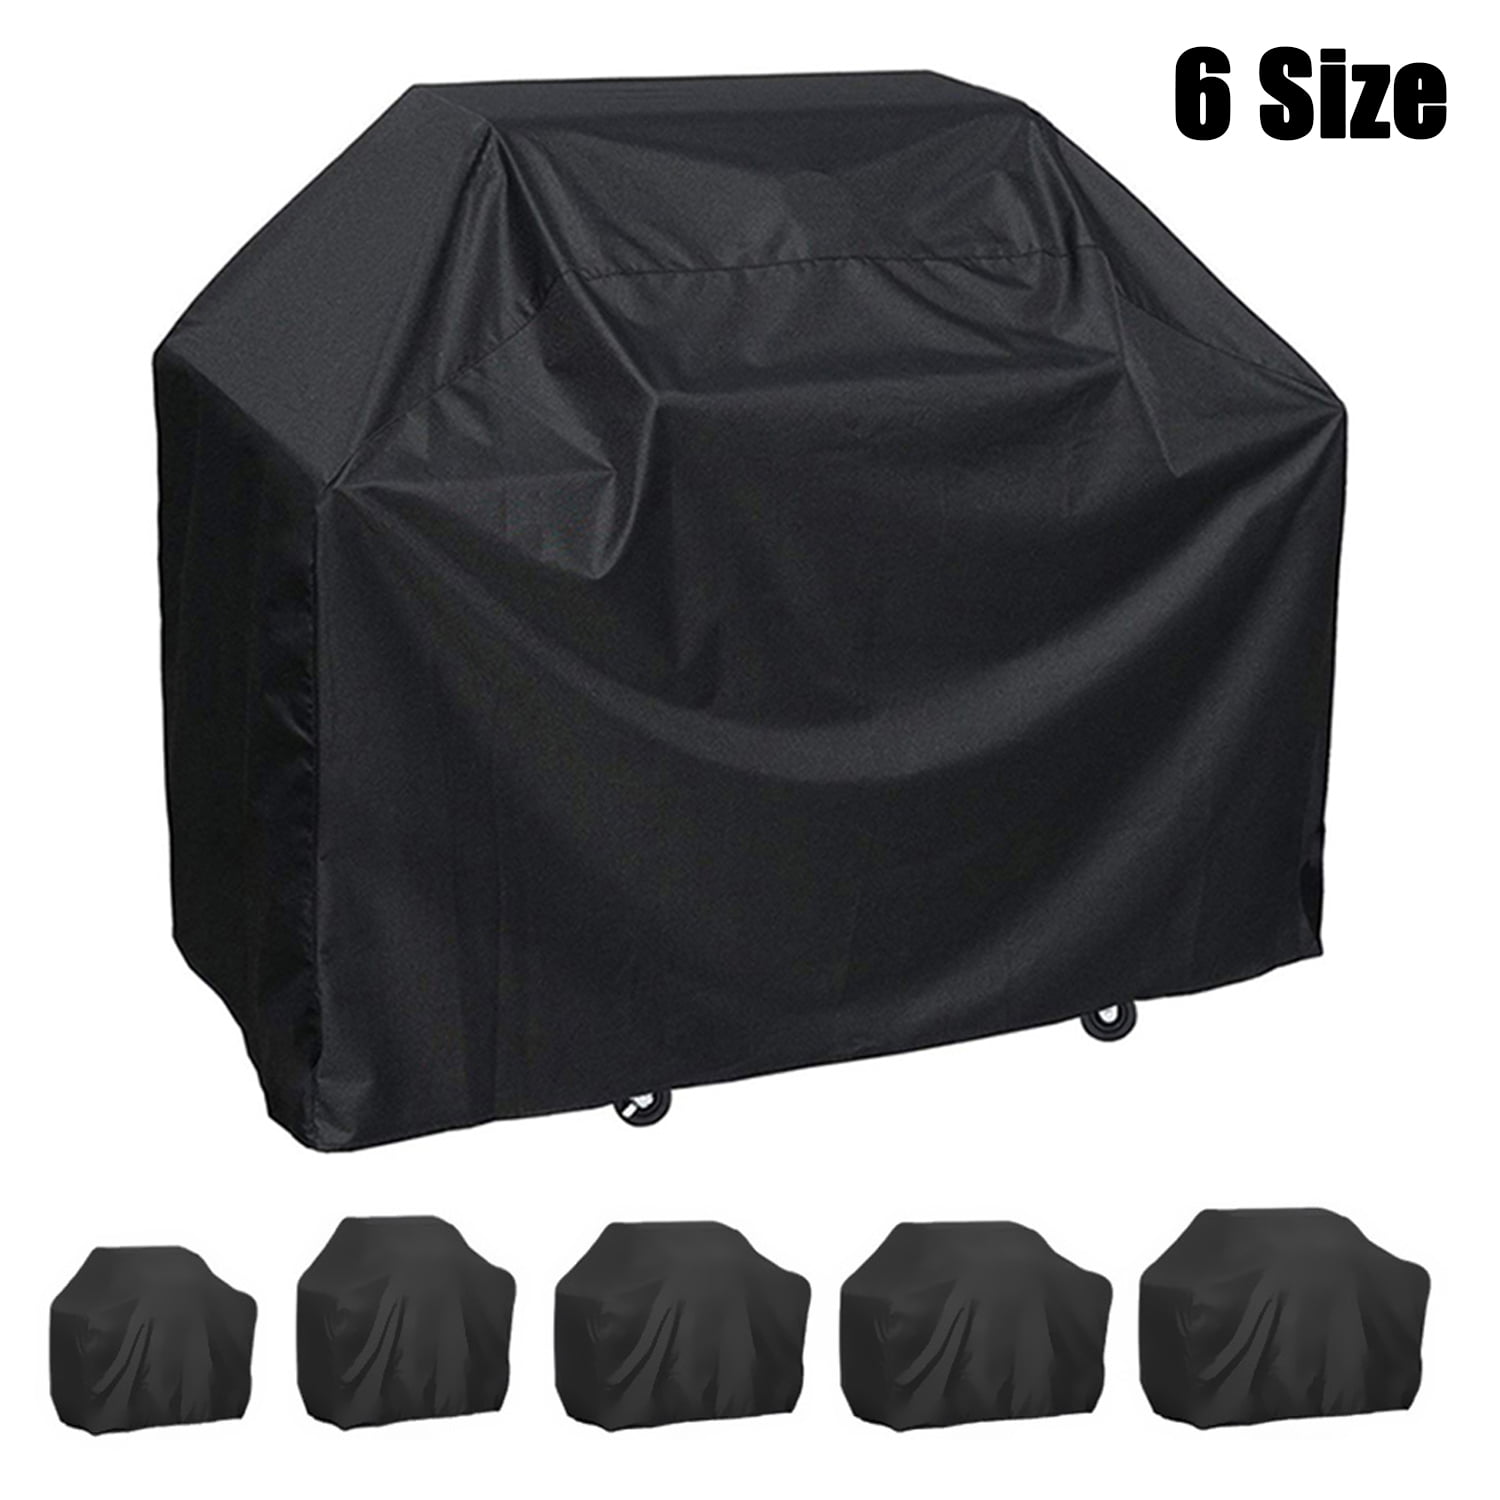 BBQ Gas Grill Cover Barbecue Waterproof Outdoor Heavy Duty Protection Large 